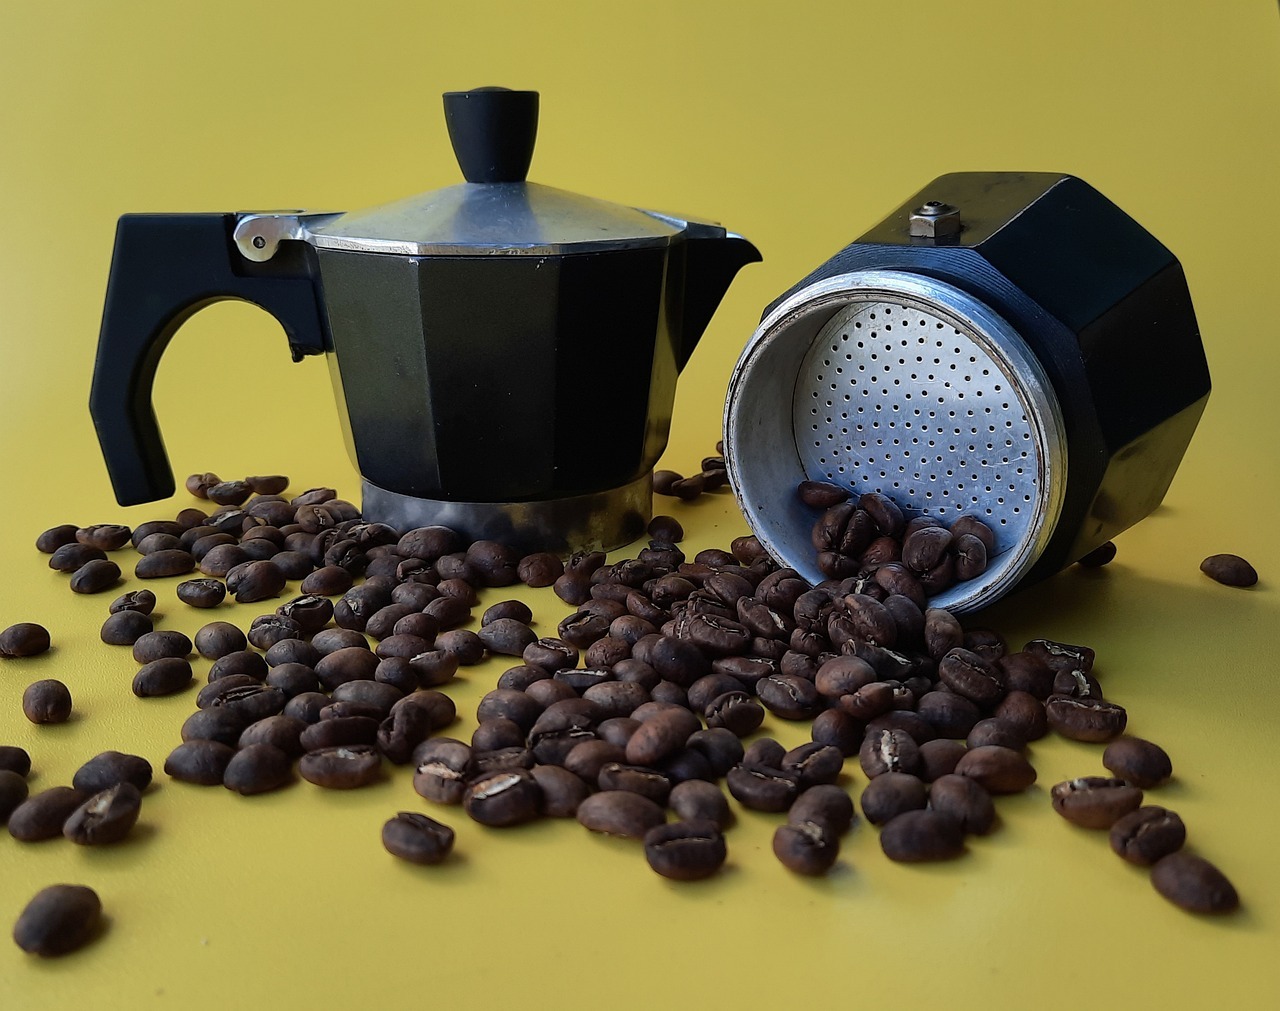 History of Coffee Makers and Coffee